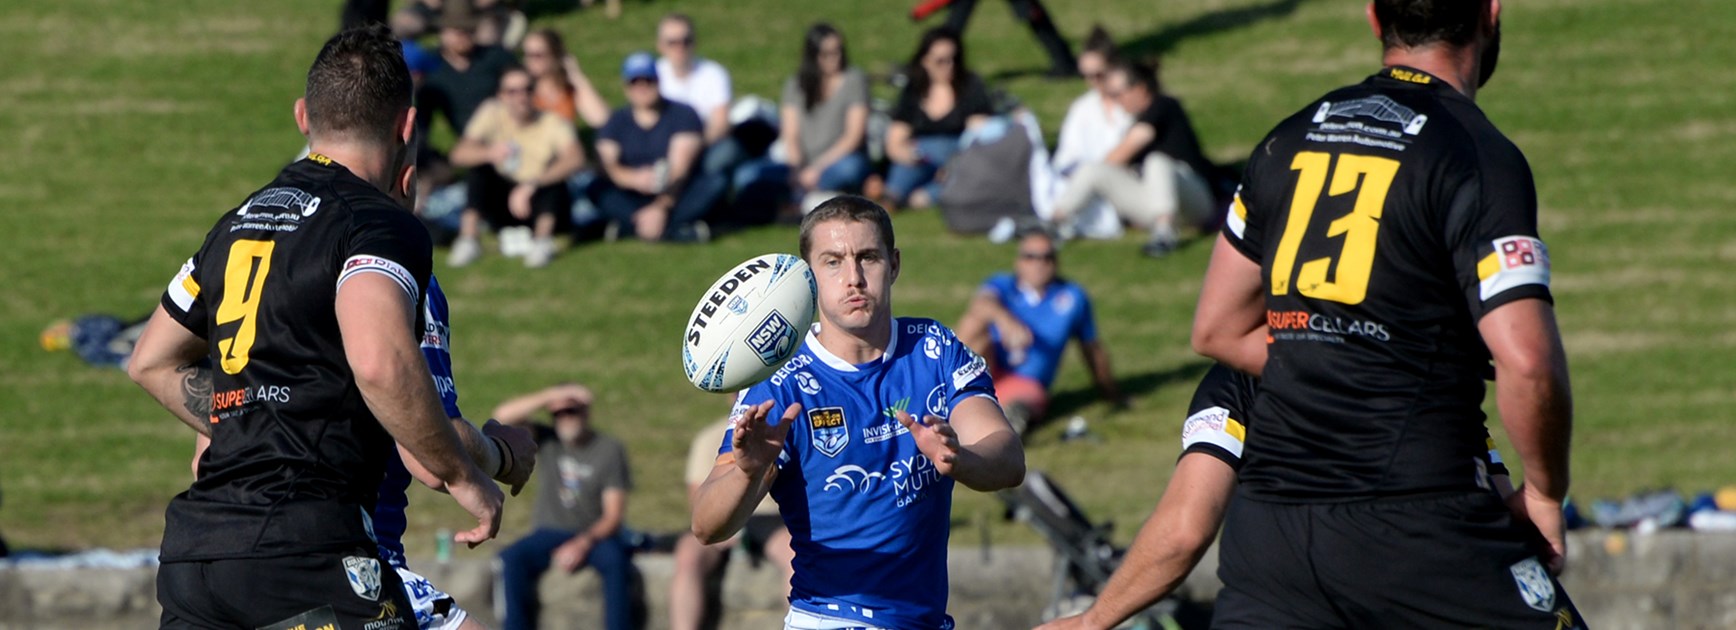 KOE NSW Cup Team List – Jets v Panthers